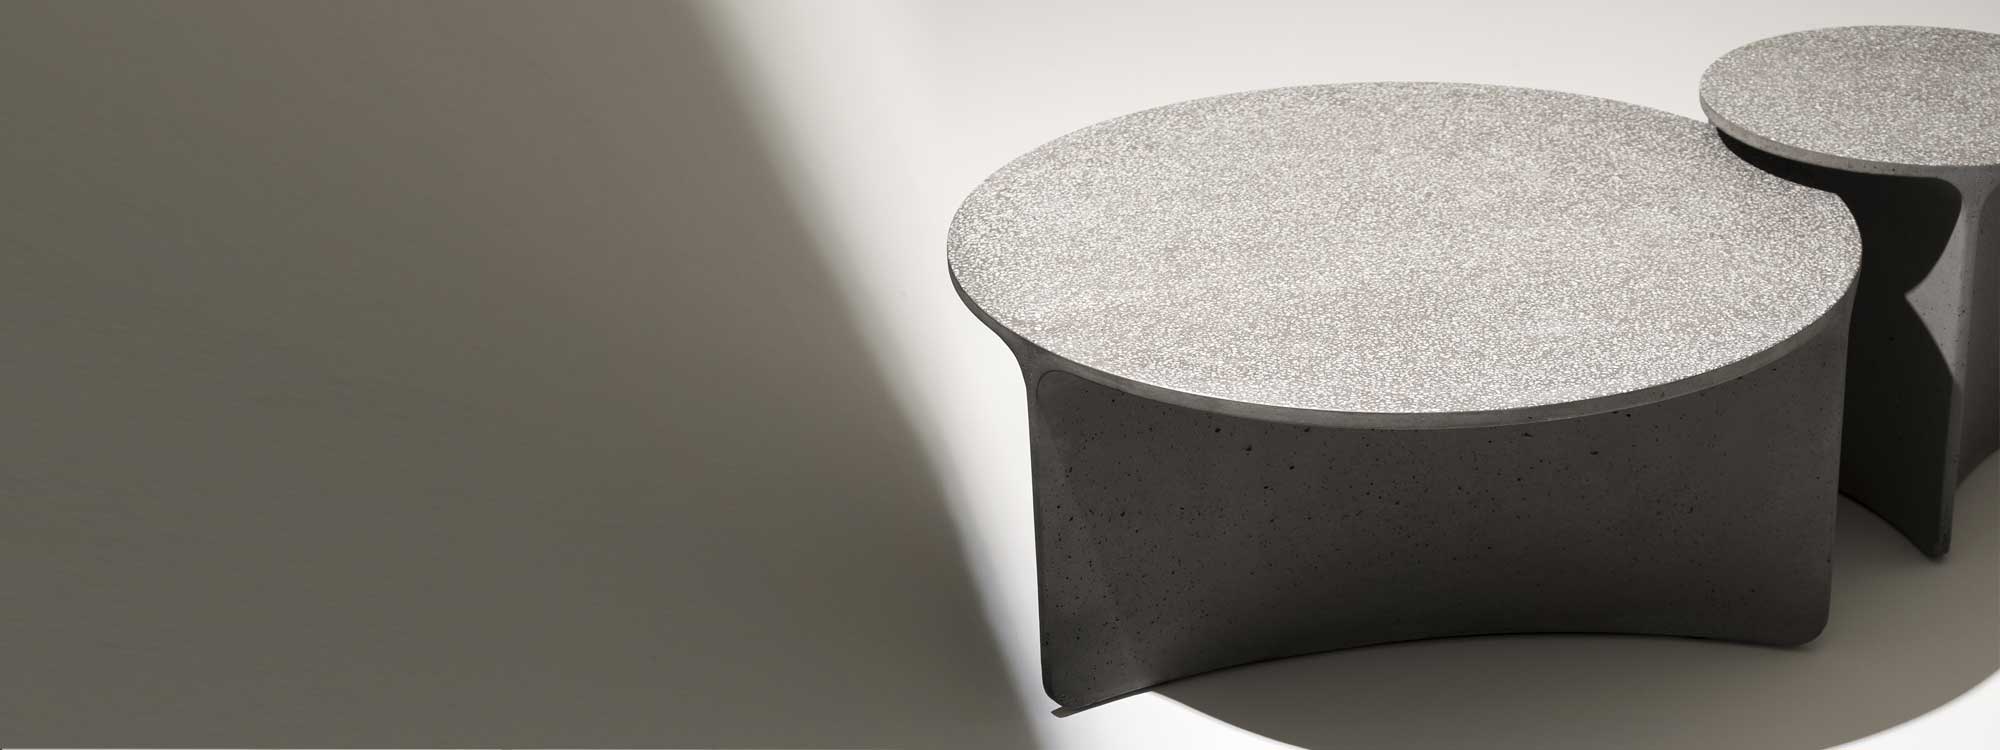 Studio image in light and shade of RODA Aspic concrete low garden tables with shingle suspended in tabletop